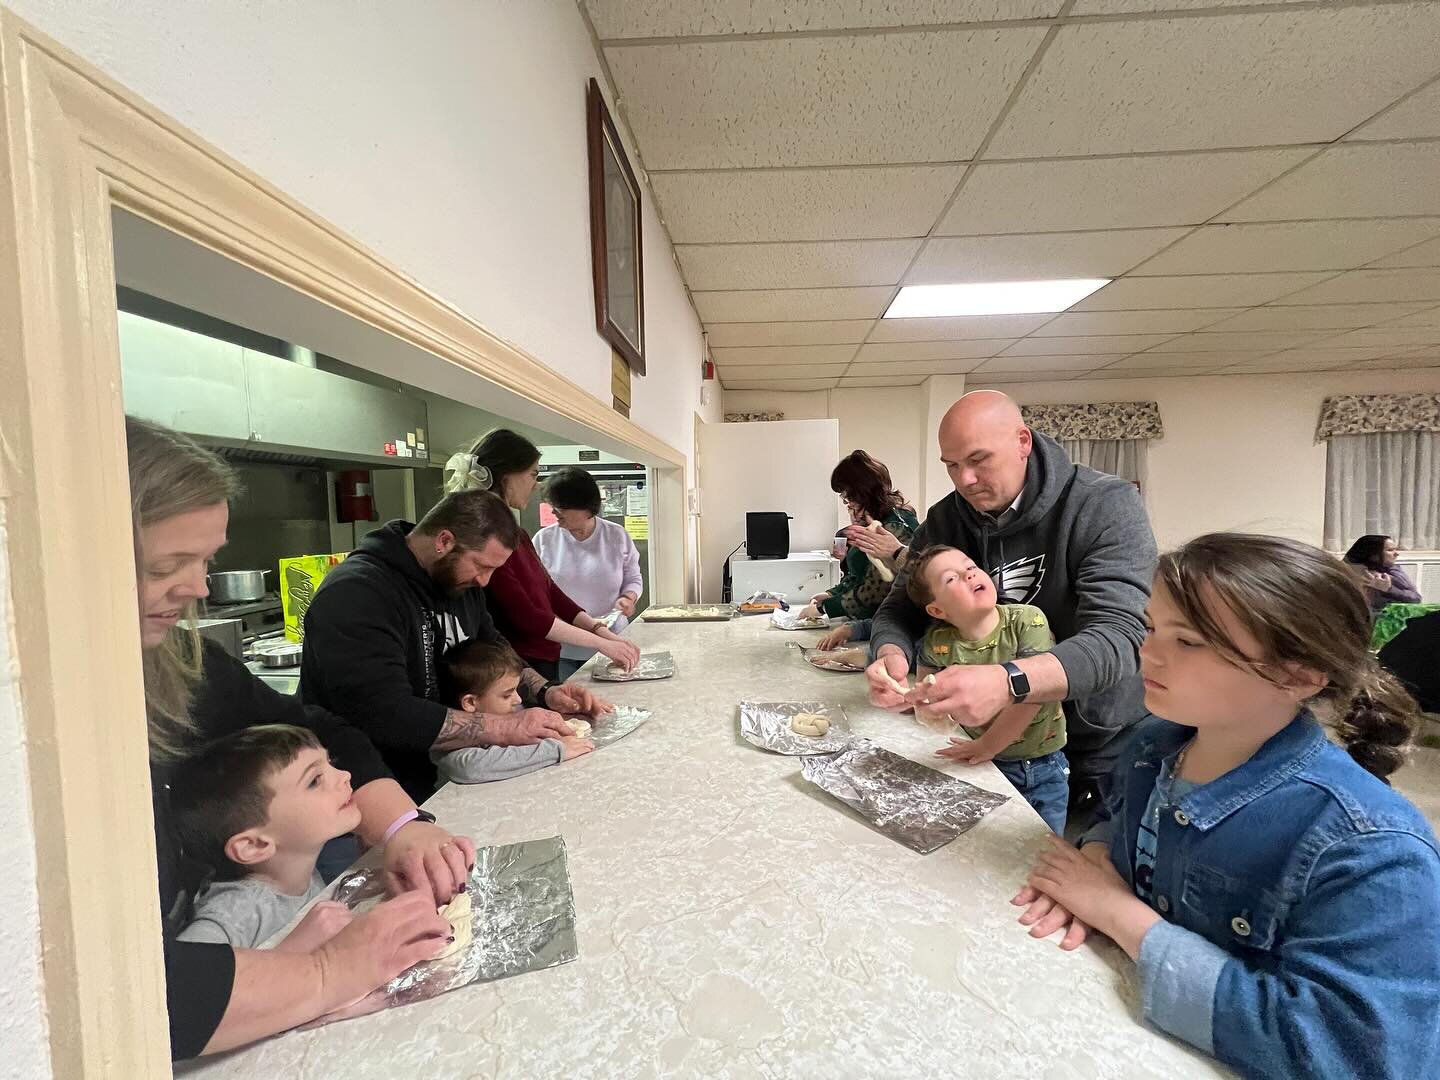 Palm Friday was a great event! Thank you to all who came and all volunteers, and especially to Amy Davis for putting the event together. Stay tuned for our Holy Week schedule! 🌴💒